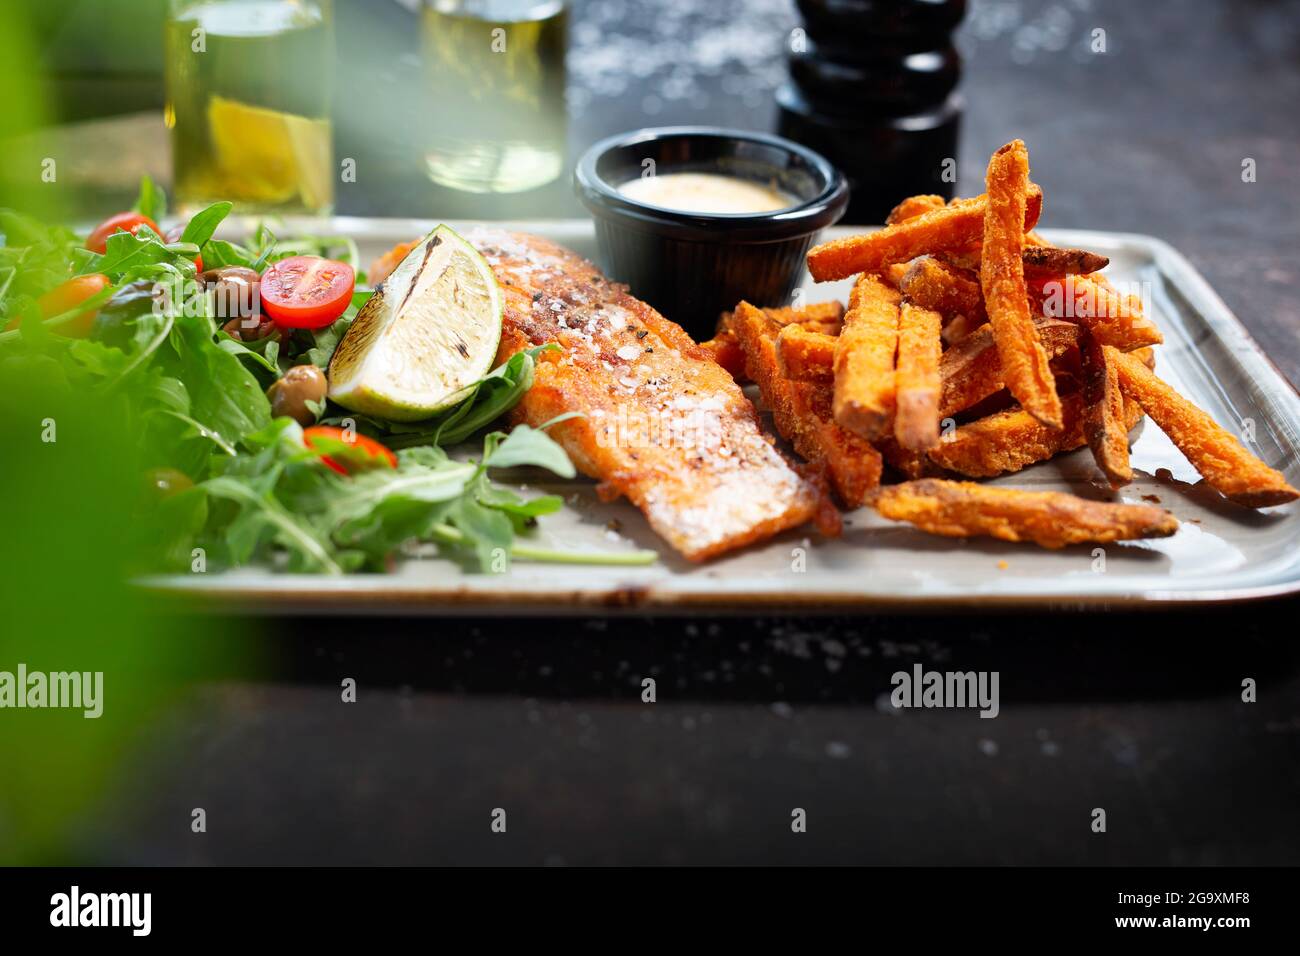 Grilled salmon with sweet potato fries, and salad. The cook cooks and serves an appetizing dish. The finished dish served on a plate. Serving proposal Stock Photo